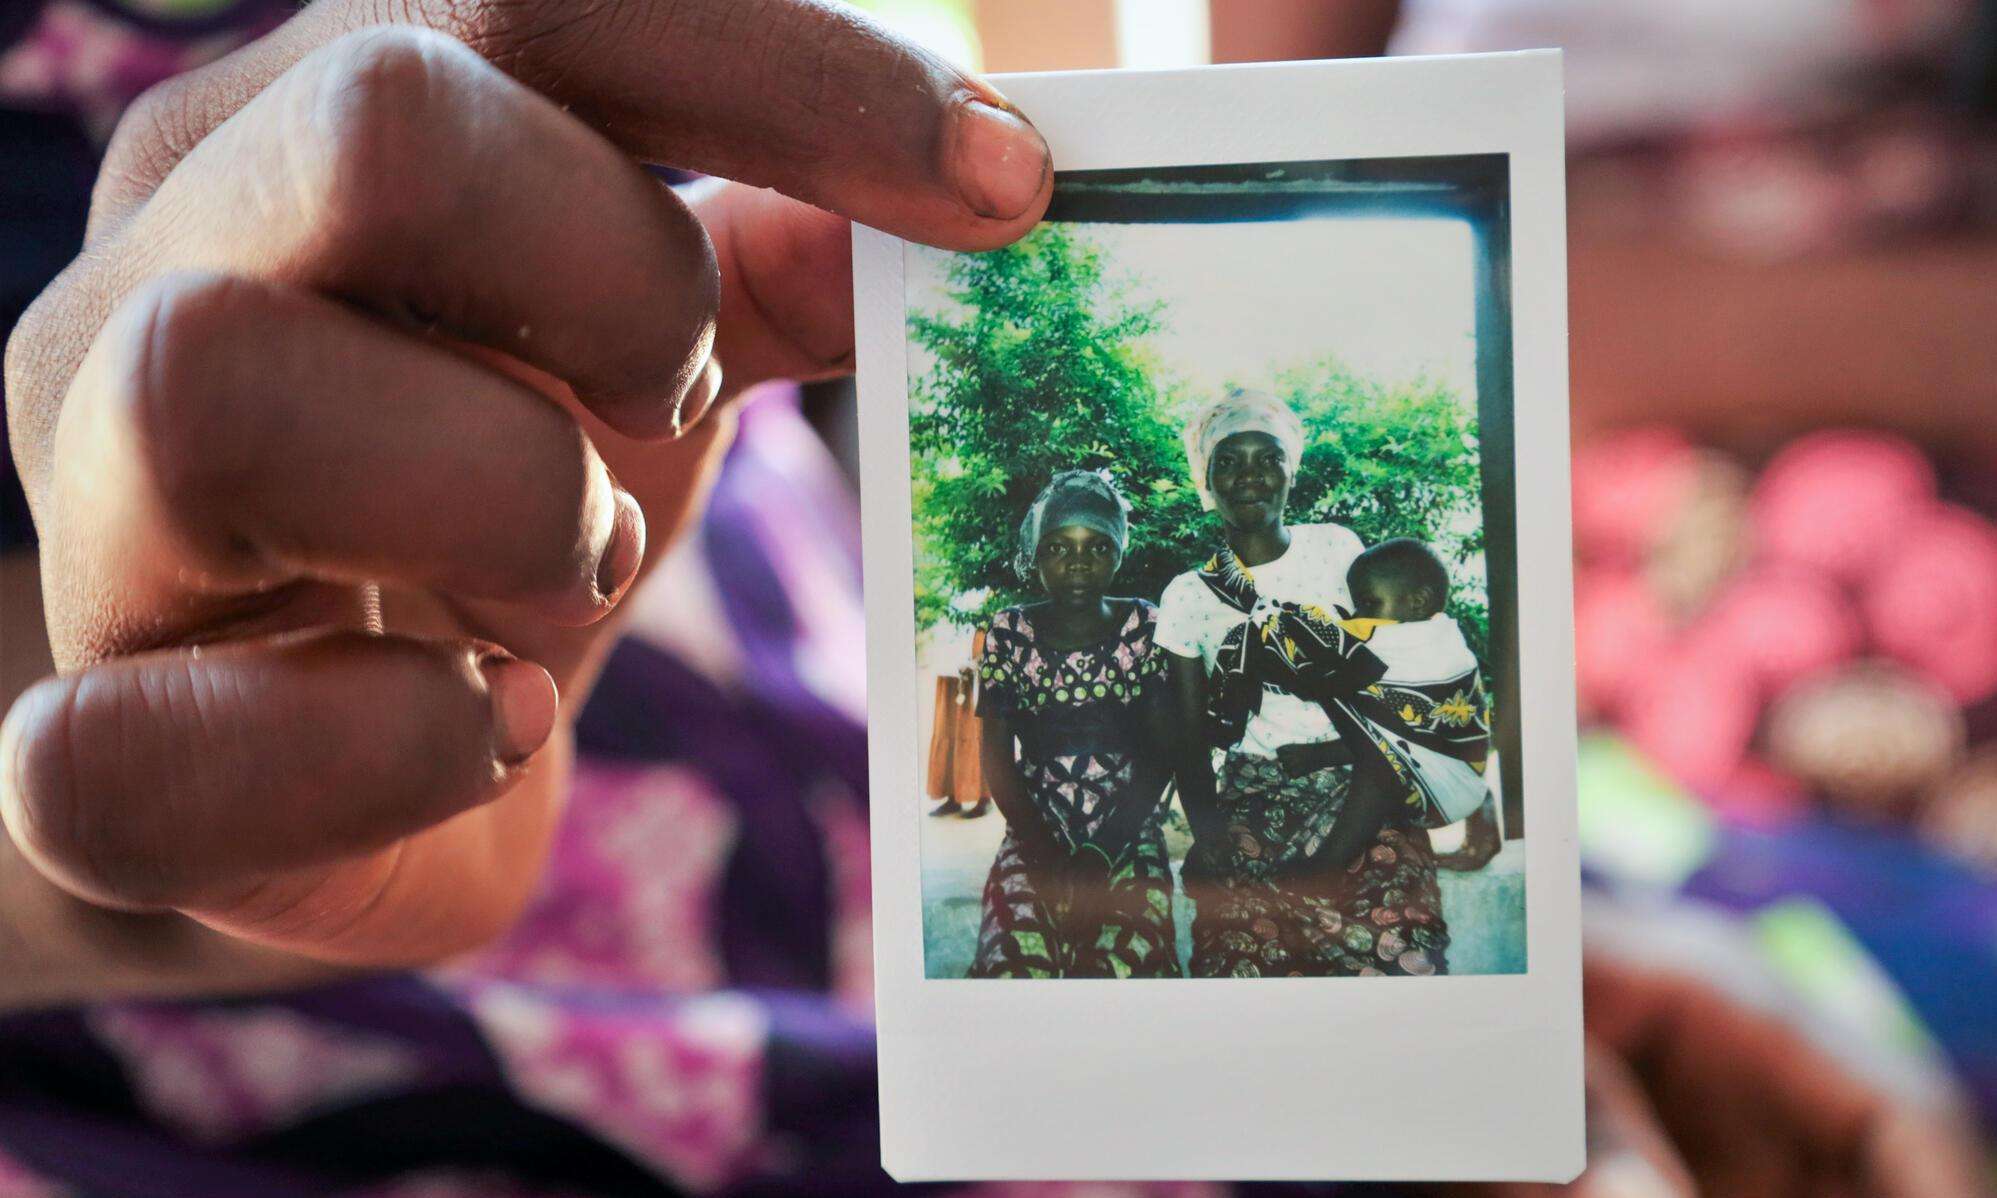 A woman holds a polaroid photo of a family in Mozambique.